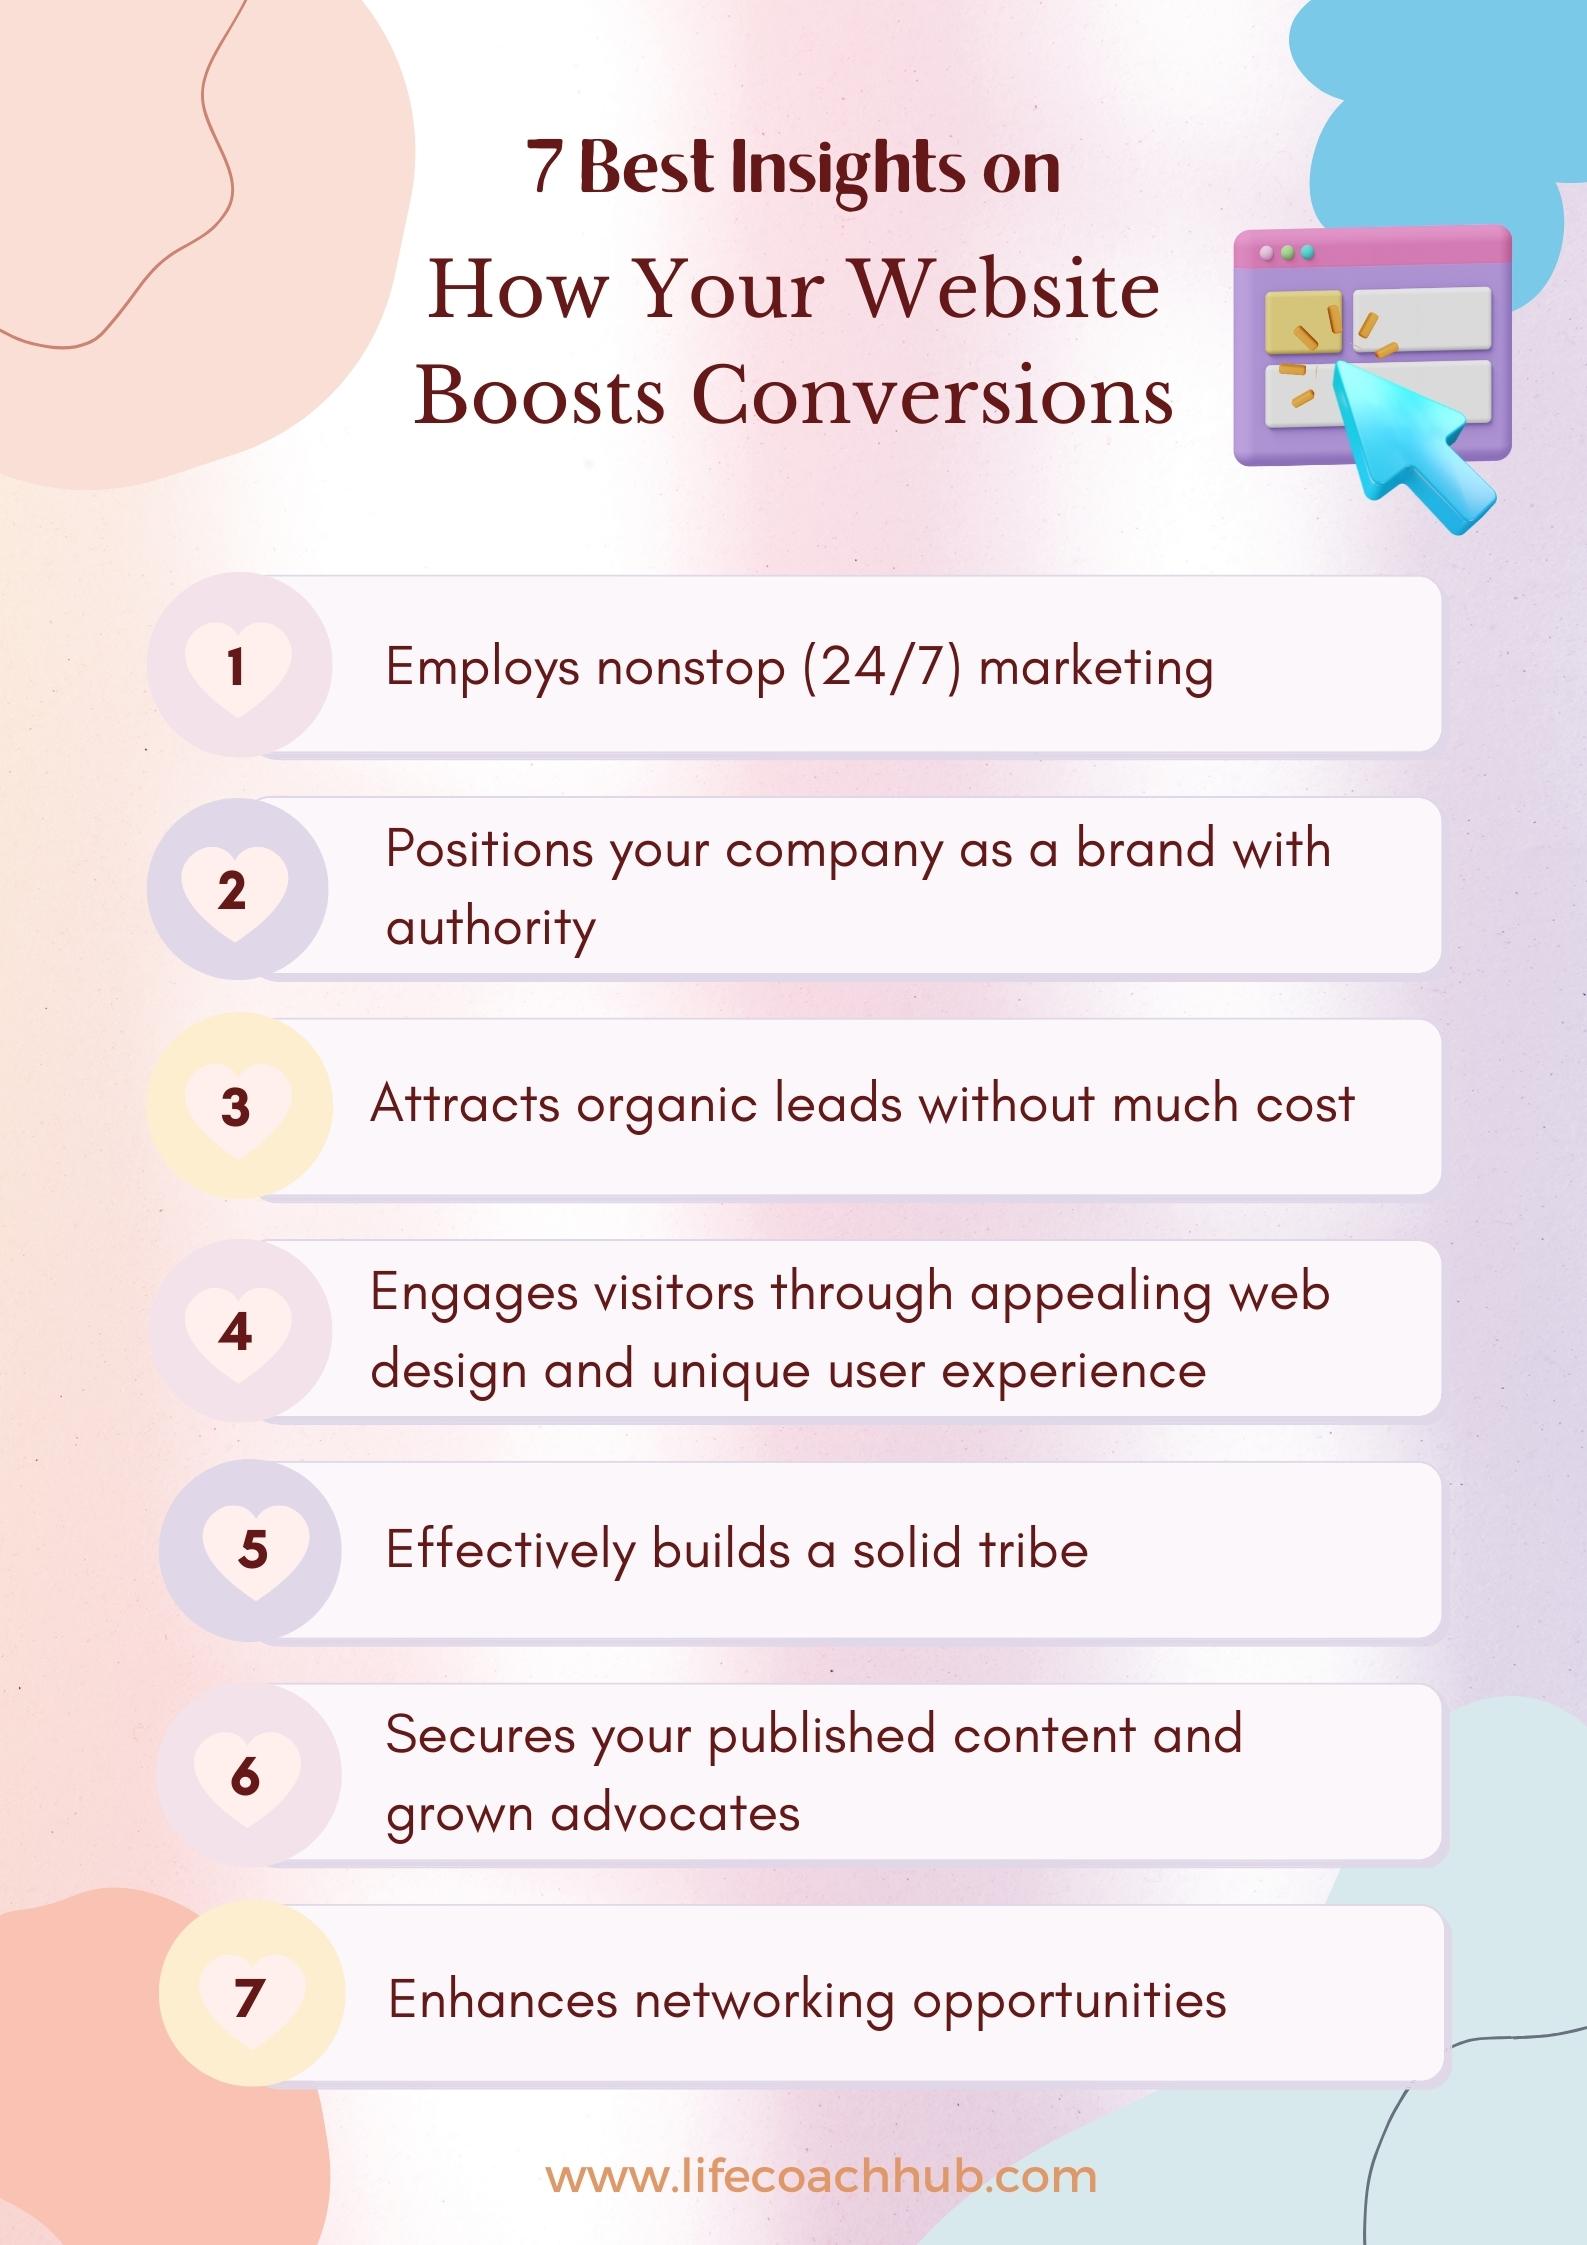 7 Best insights on how website boosts conversions